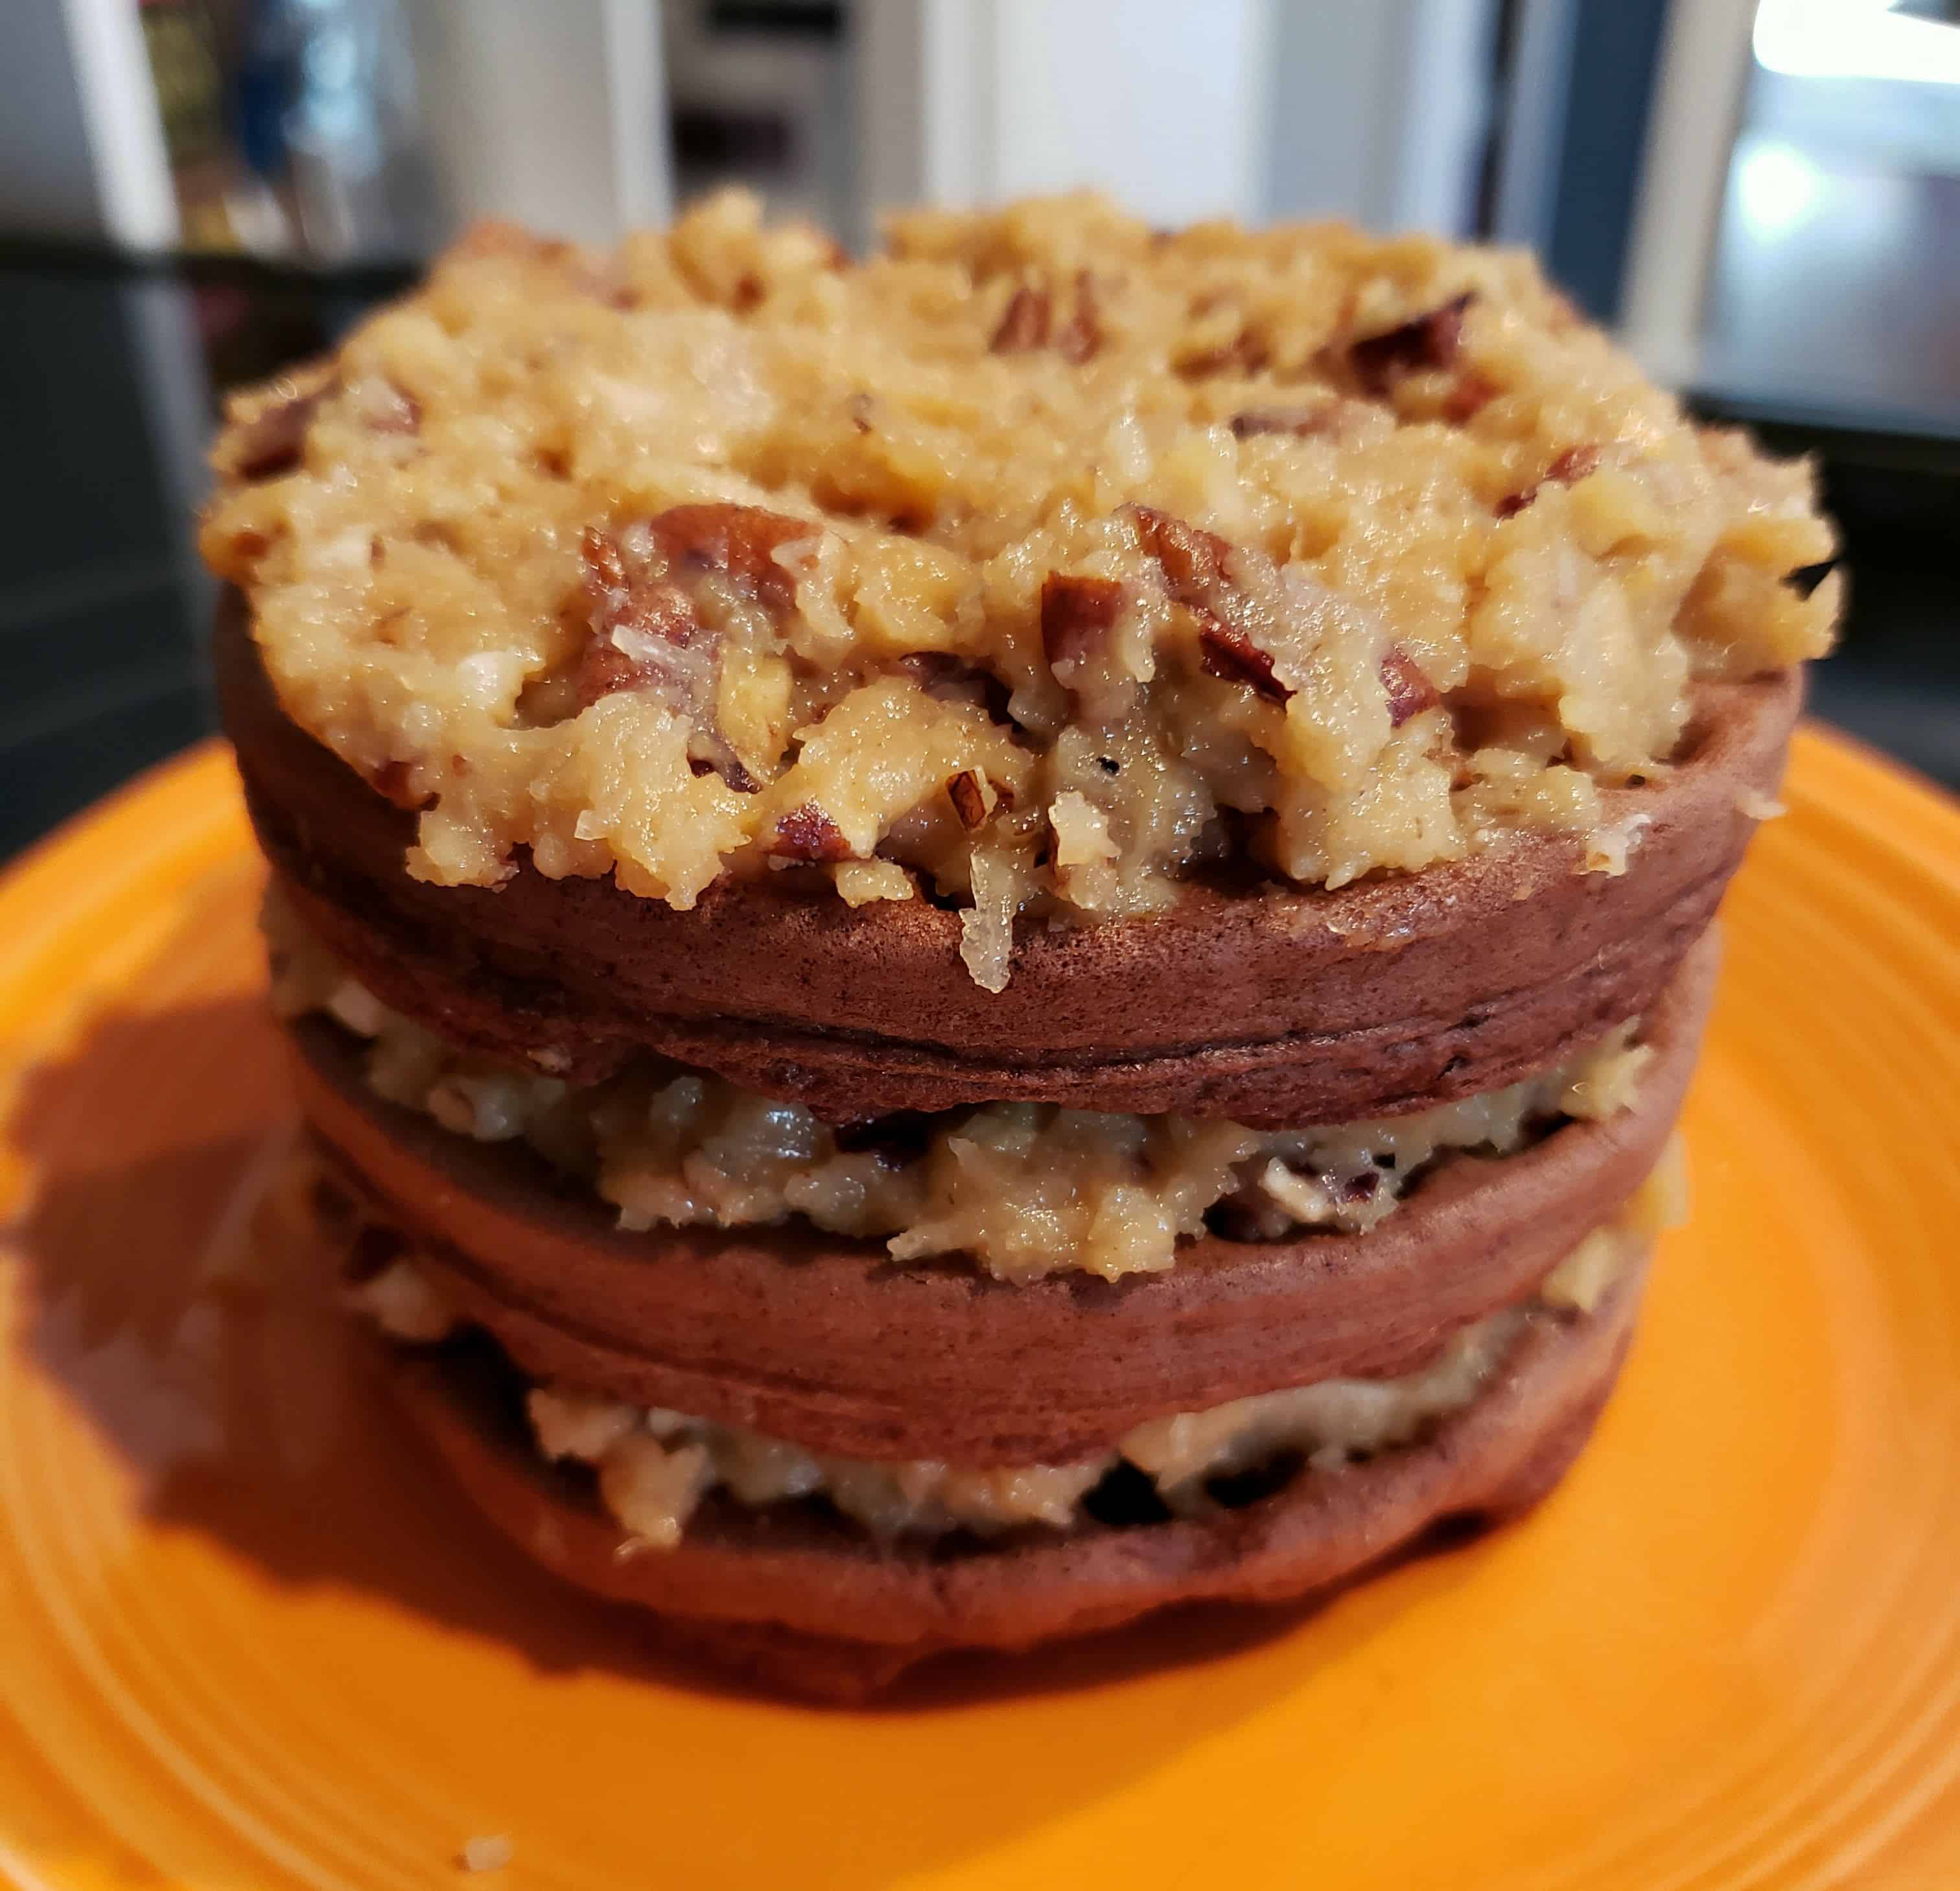 Have you been missing German Chocolate cake? Well...we have you covered! Now you can enjoy this German Chocolate Chaffle Cake any time of year!